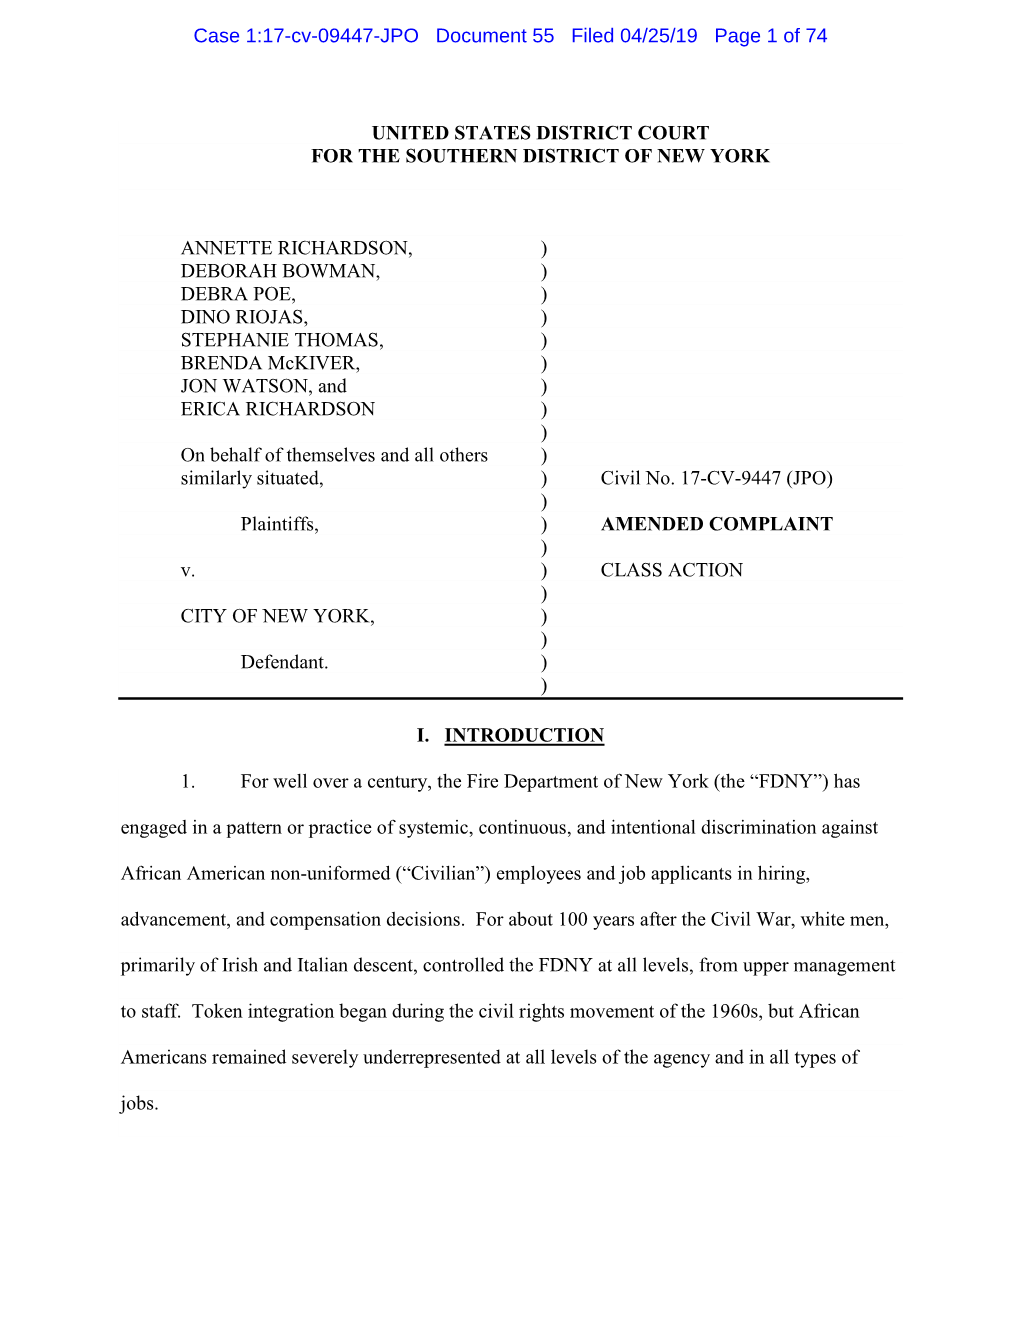 Case 1:17-Cv-09447-JPO Document 55 Filed 04/25/19 Page 1 of 74